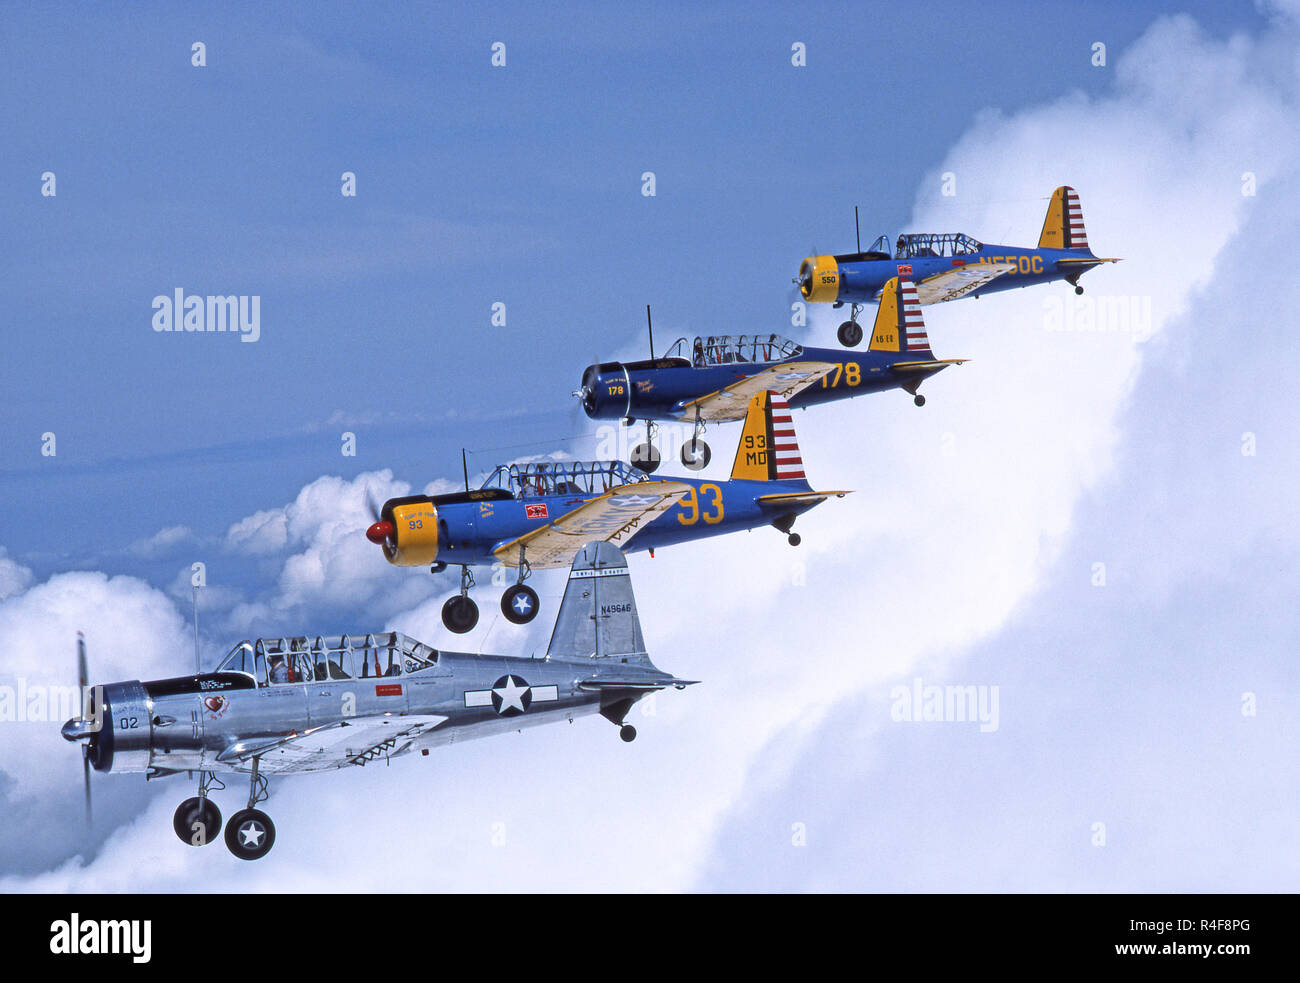 BT-13/15 WWII trainer airplanes Stock Photo